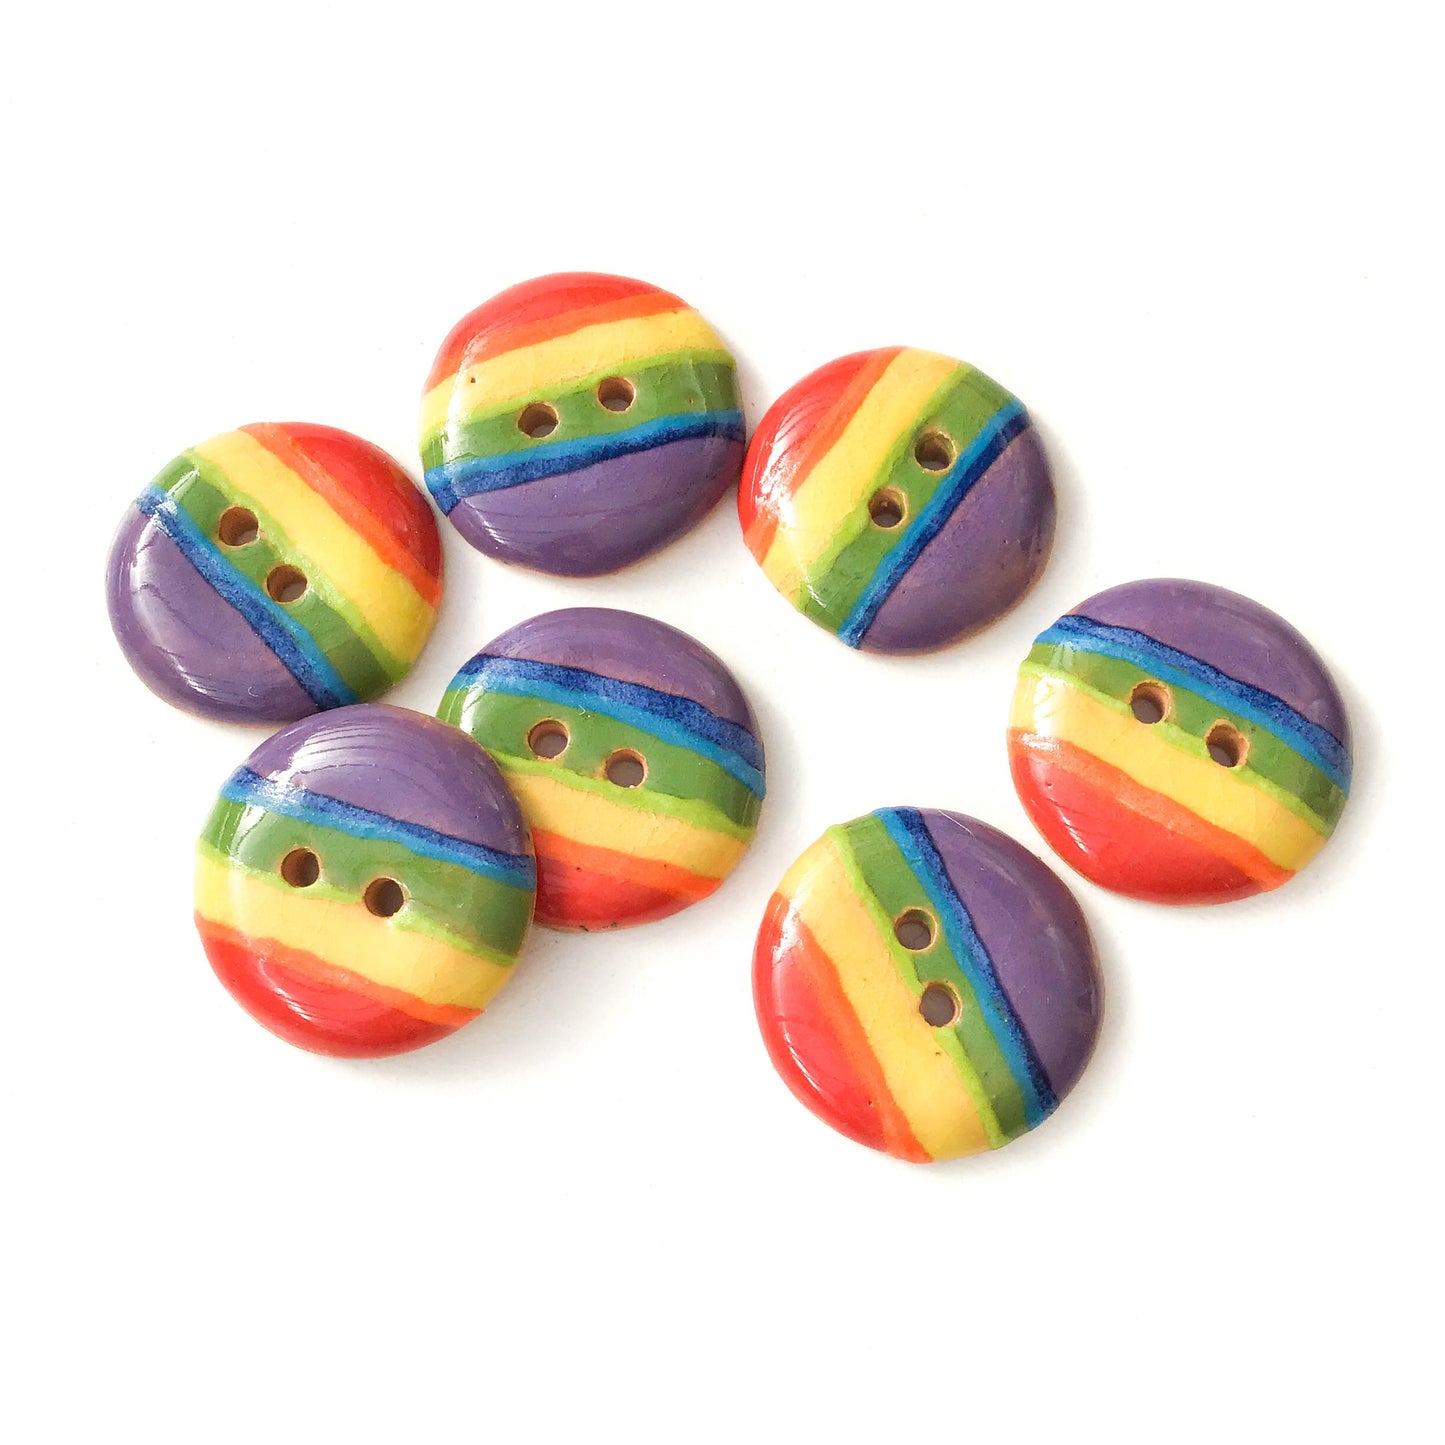 Striped Rainbow Buttons - Ceramic Rainbow Buttons - 3/4" - 7 Pack